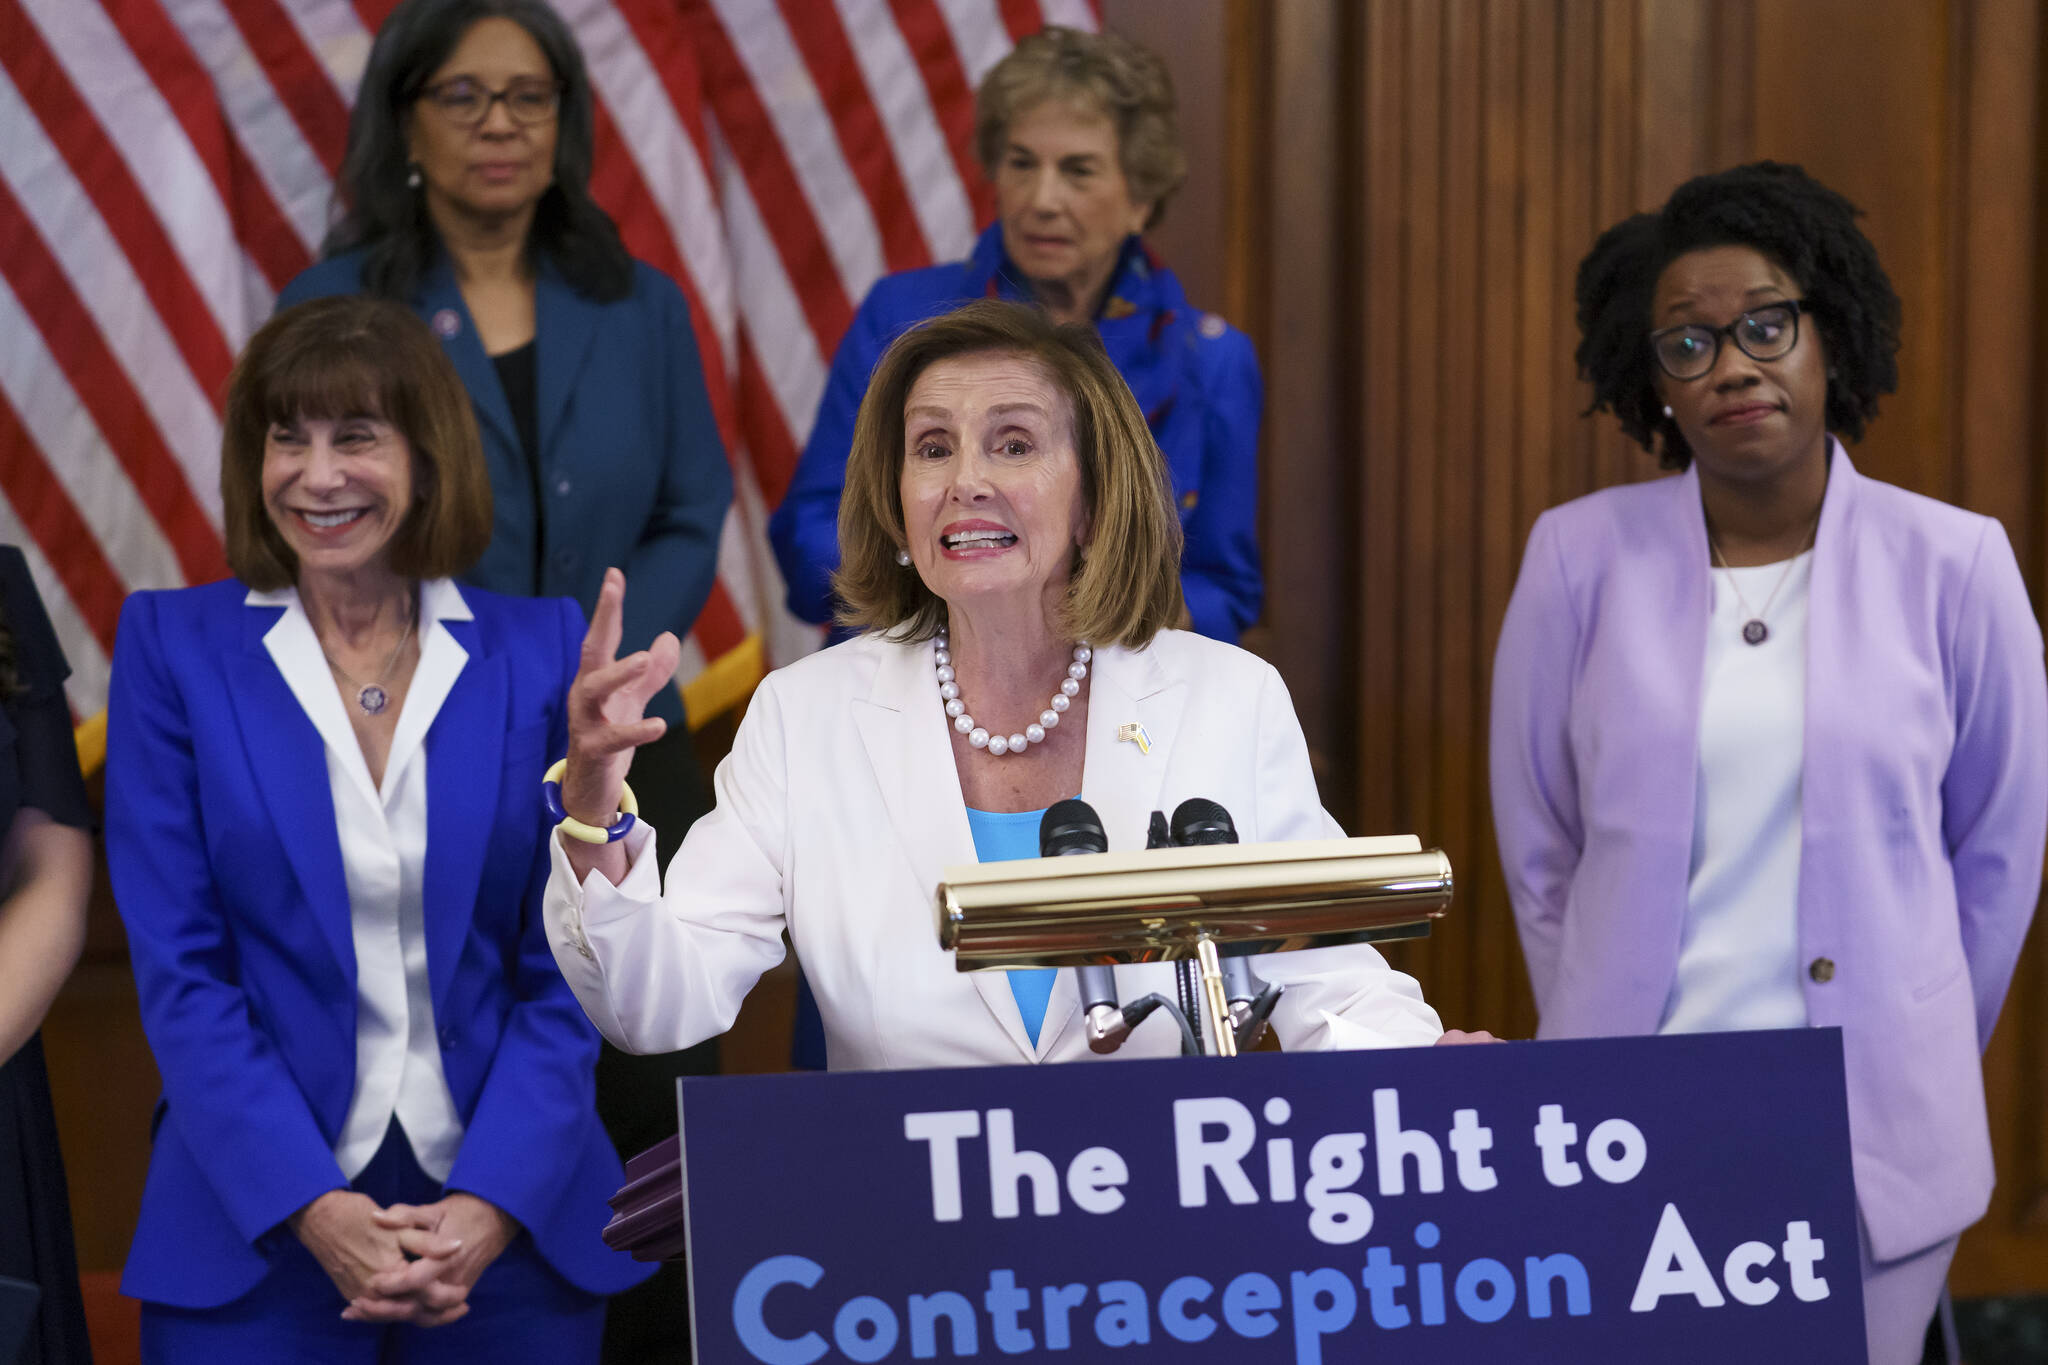 Speaker of the House Nancy Pelosi, D-Calif., makes a point during an event with Democratic women House members and advocates for reproductive freedom ahead of the vote on the Right to Contraception Act, at the Capitol in Washington, Wednesday, July 20, 2022. She is flanked by Rep. Kathy Manning, D-N.C., and Rep. Lauren Underwood, D-Ill. Democrats are pushing legislation through the House that would inscribe the right to use contraceptives into law. (AP Photo/J. Scott Applewhite)